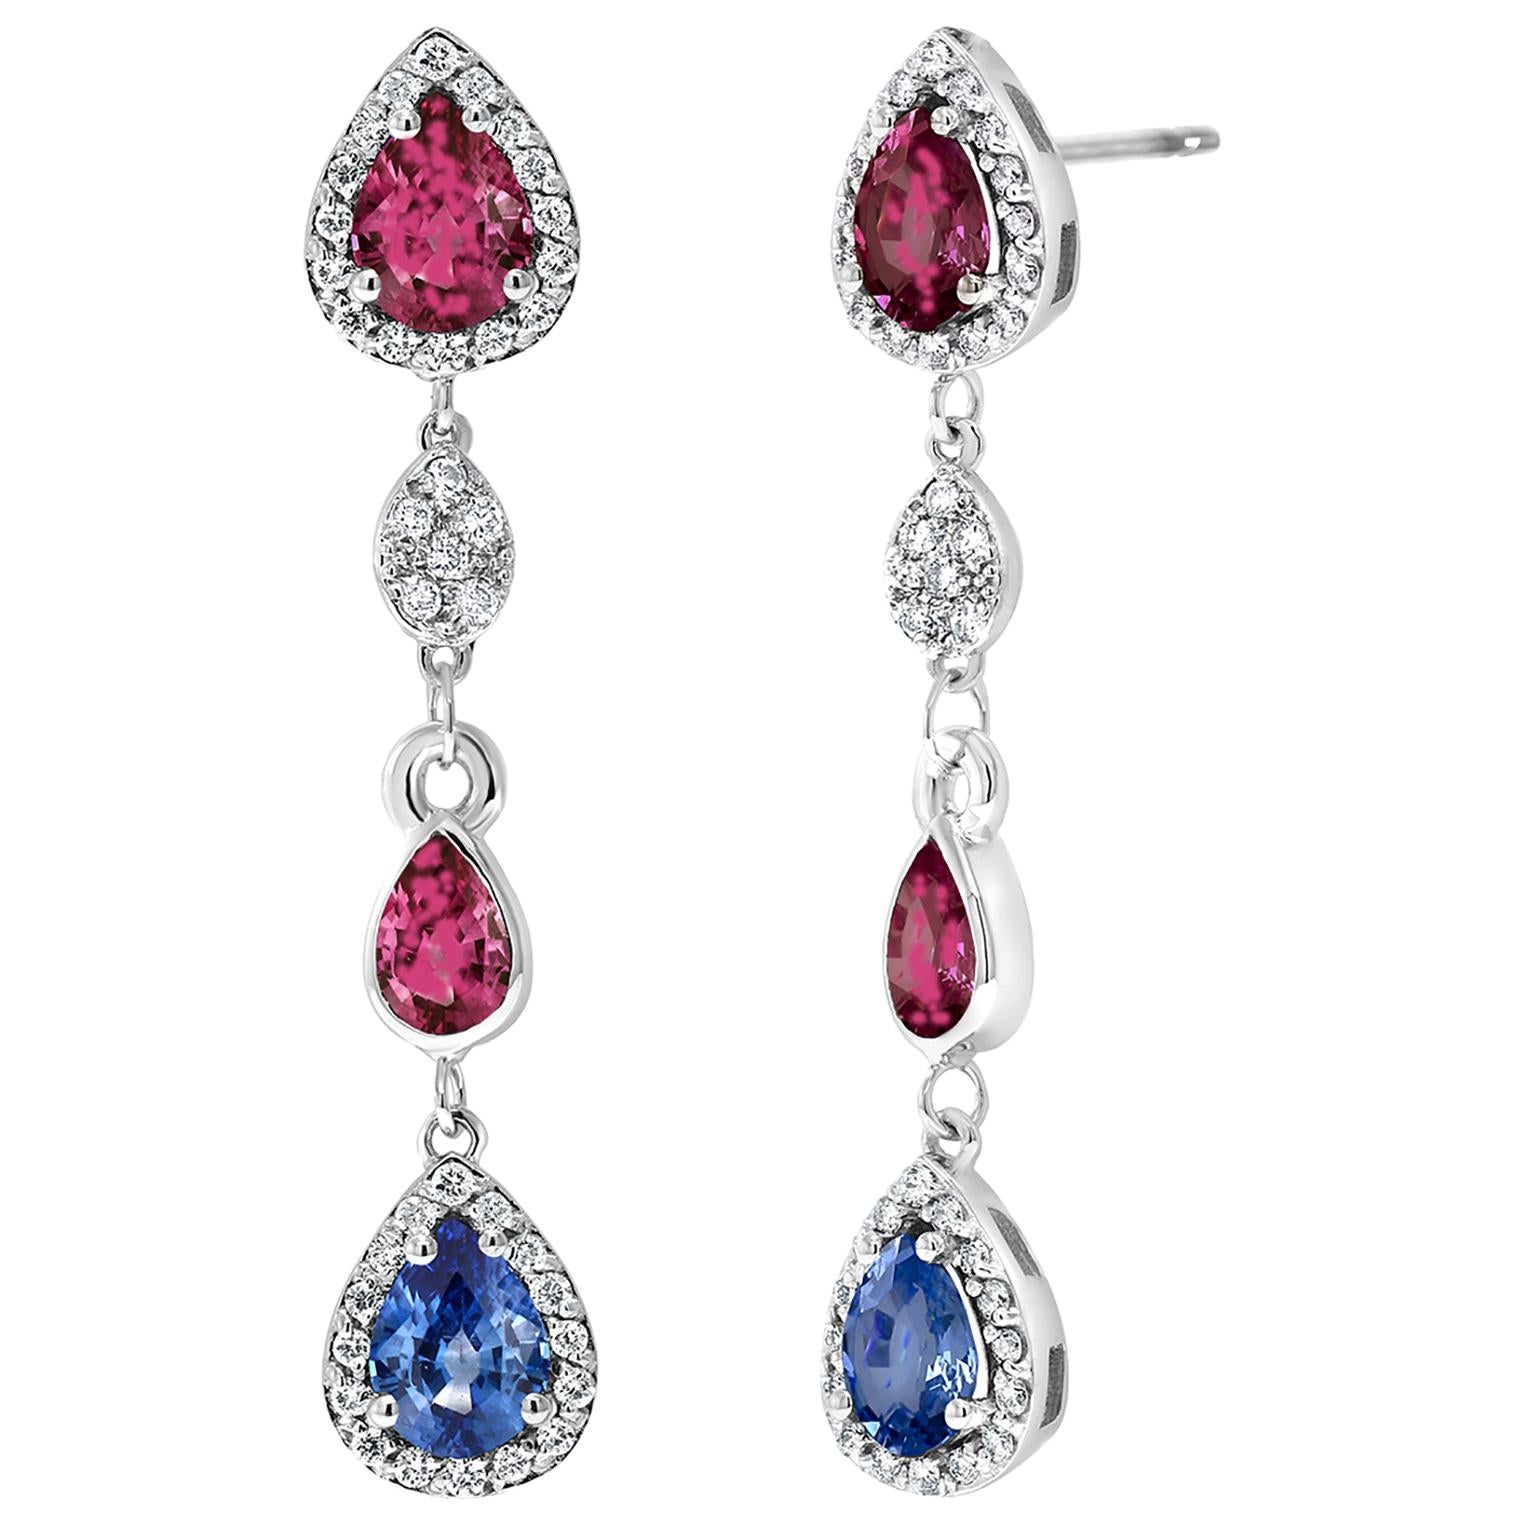 Diamond Earrings with Ruby and Sapphire Drops Weighing 4.96 Carat 